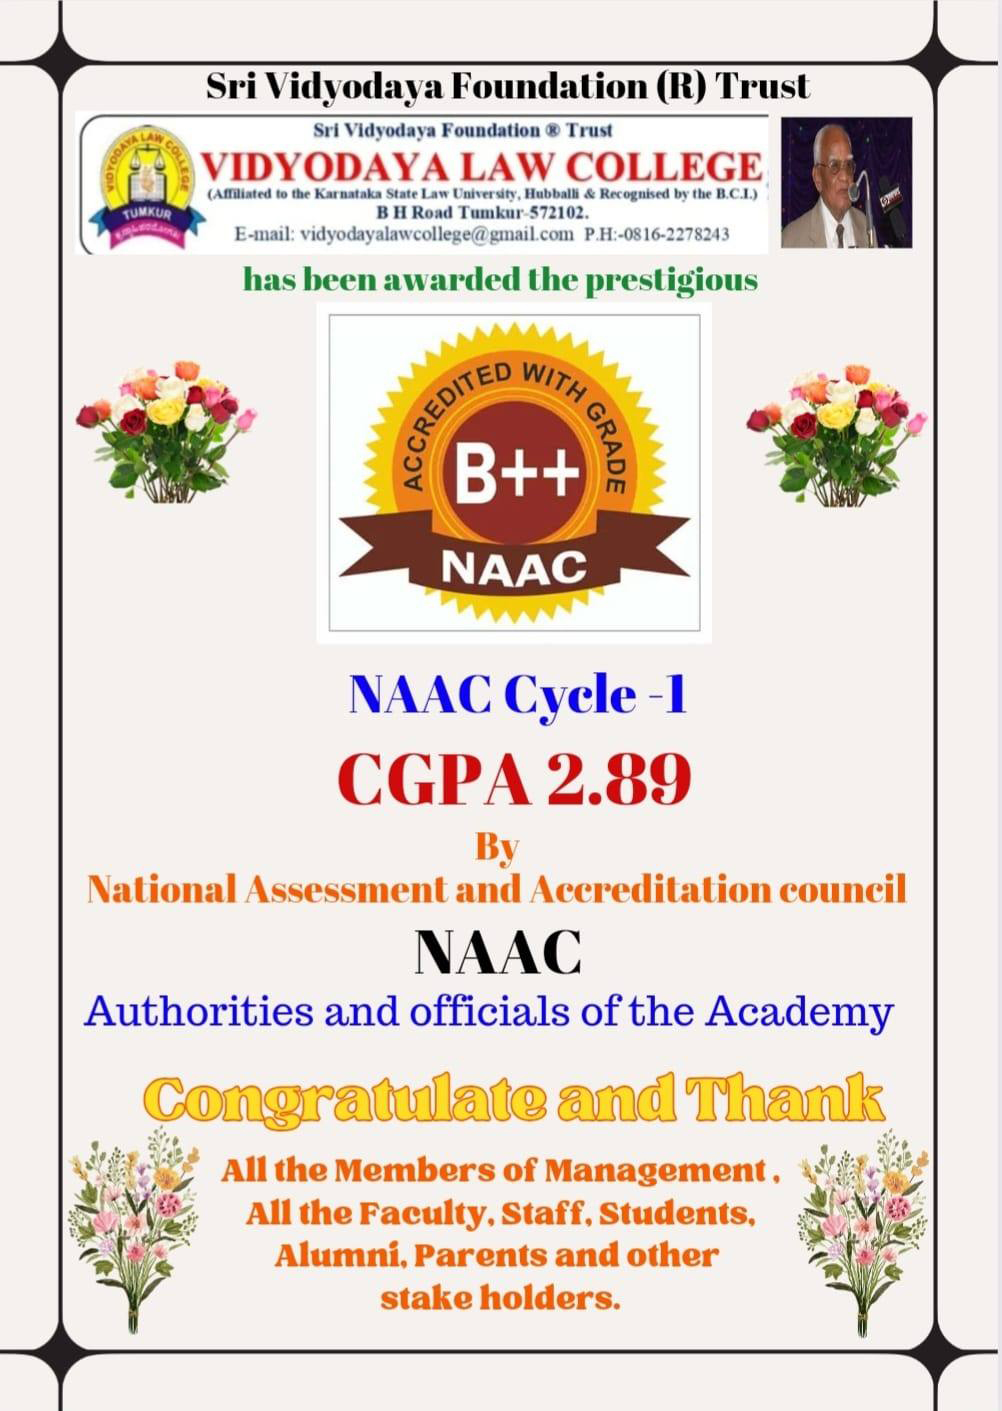 NAAC to now divulge secret scores for parameters it grades colleges on |  India News - Times of India